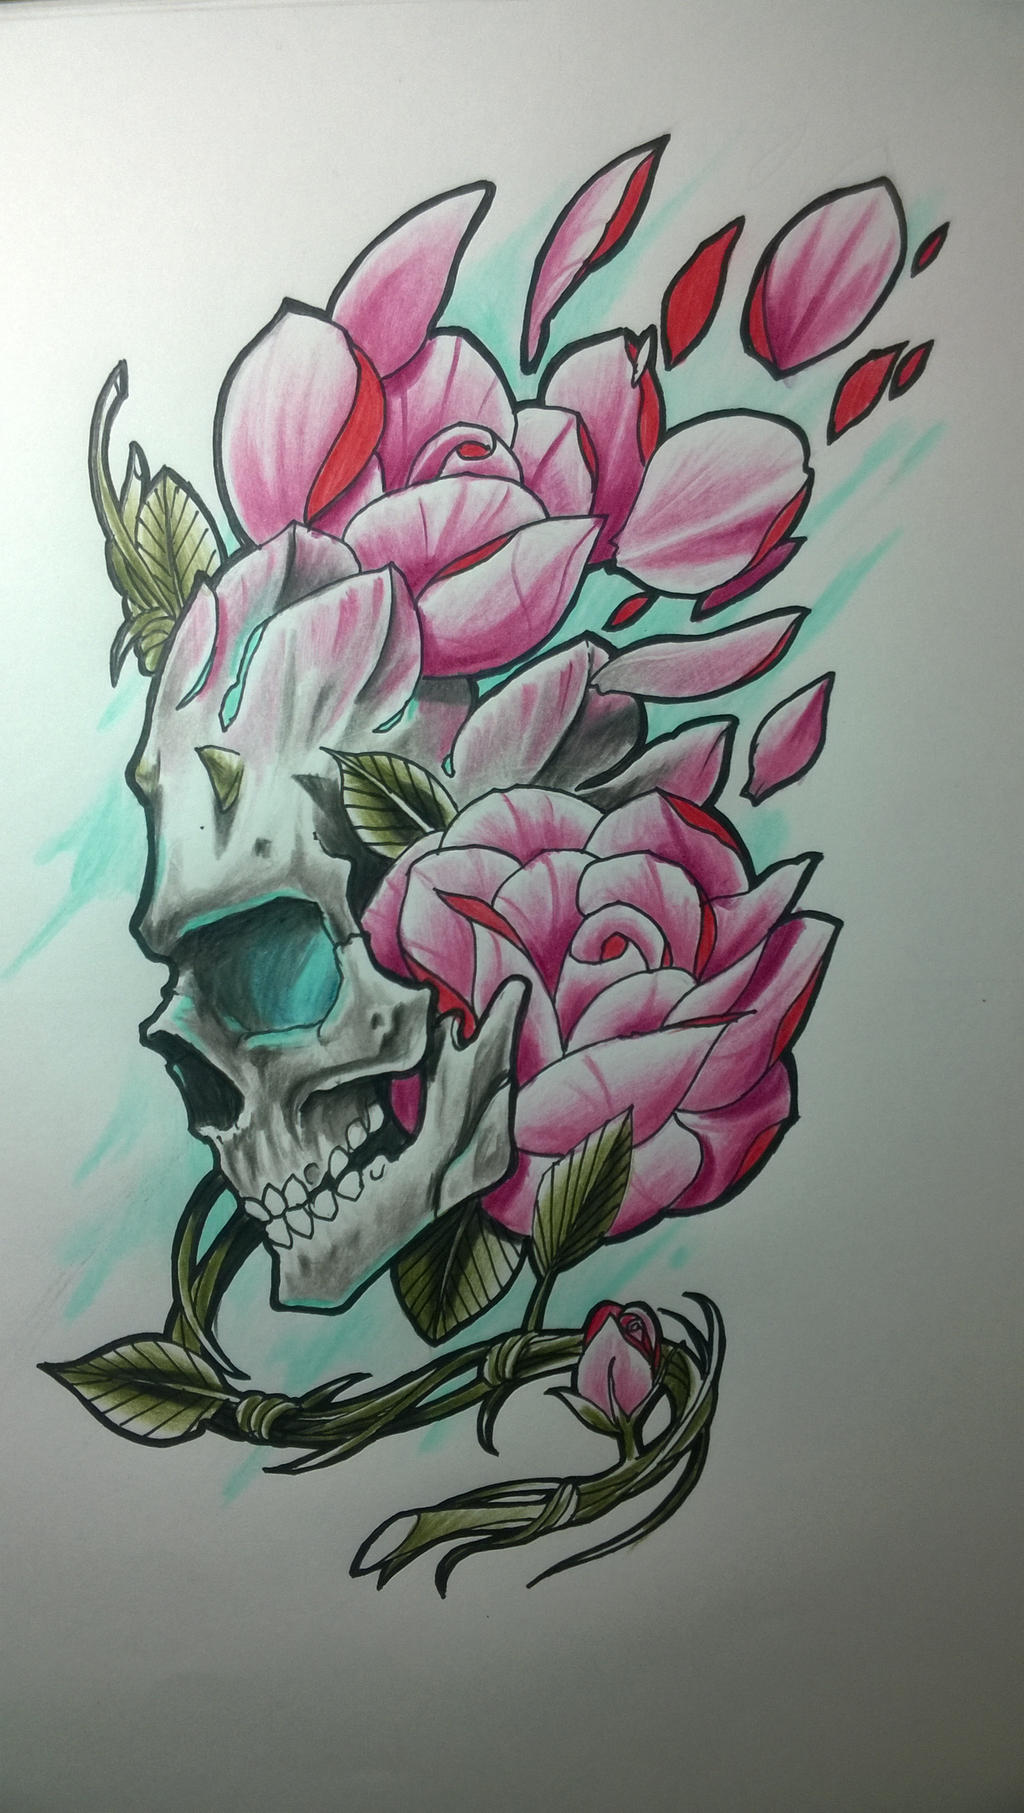 Skull and roses by LeandroIbalo on DeviantArt